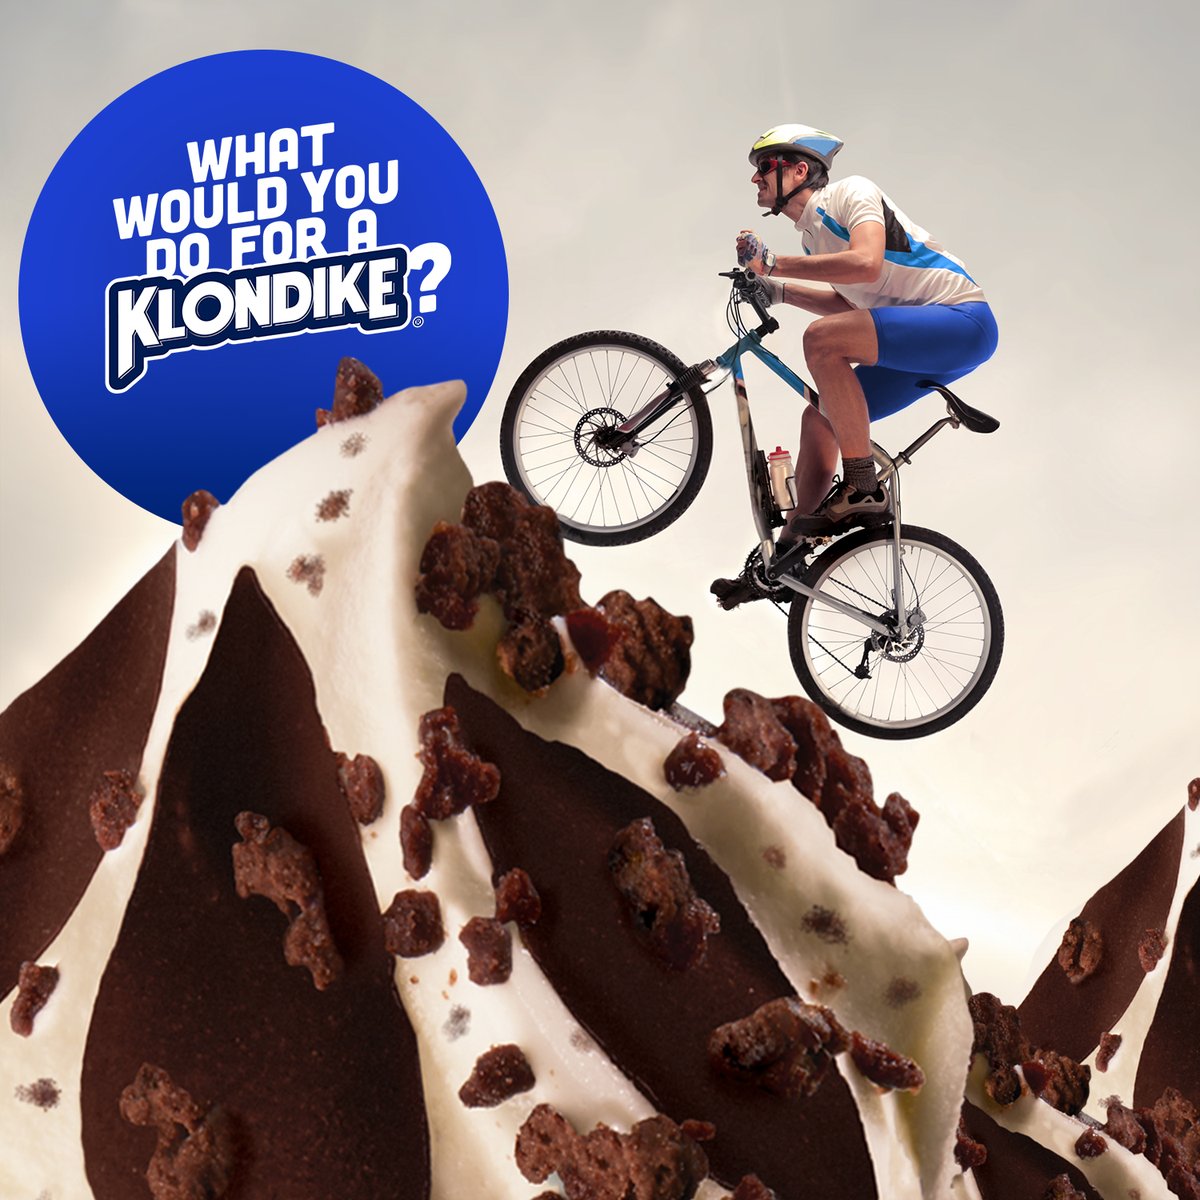 What physical feat would YOU attempt for a delicious bite of a Klondike? Extreme mountain biking? 🚴 Deep sea diving? 🤿 A cross-country marathon? 🏃 Let us know below and who knows what might happen... 👀